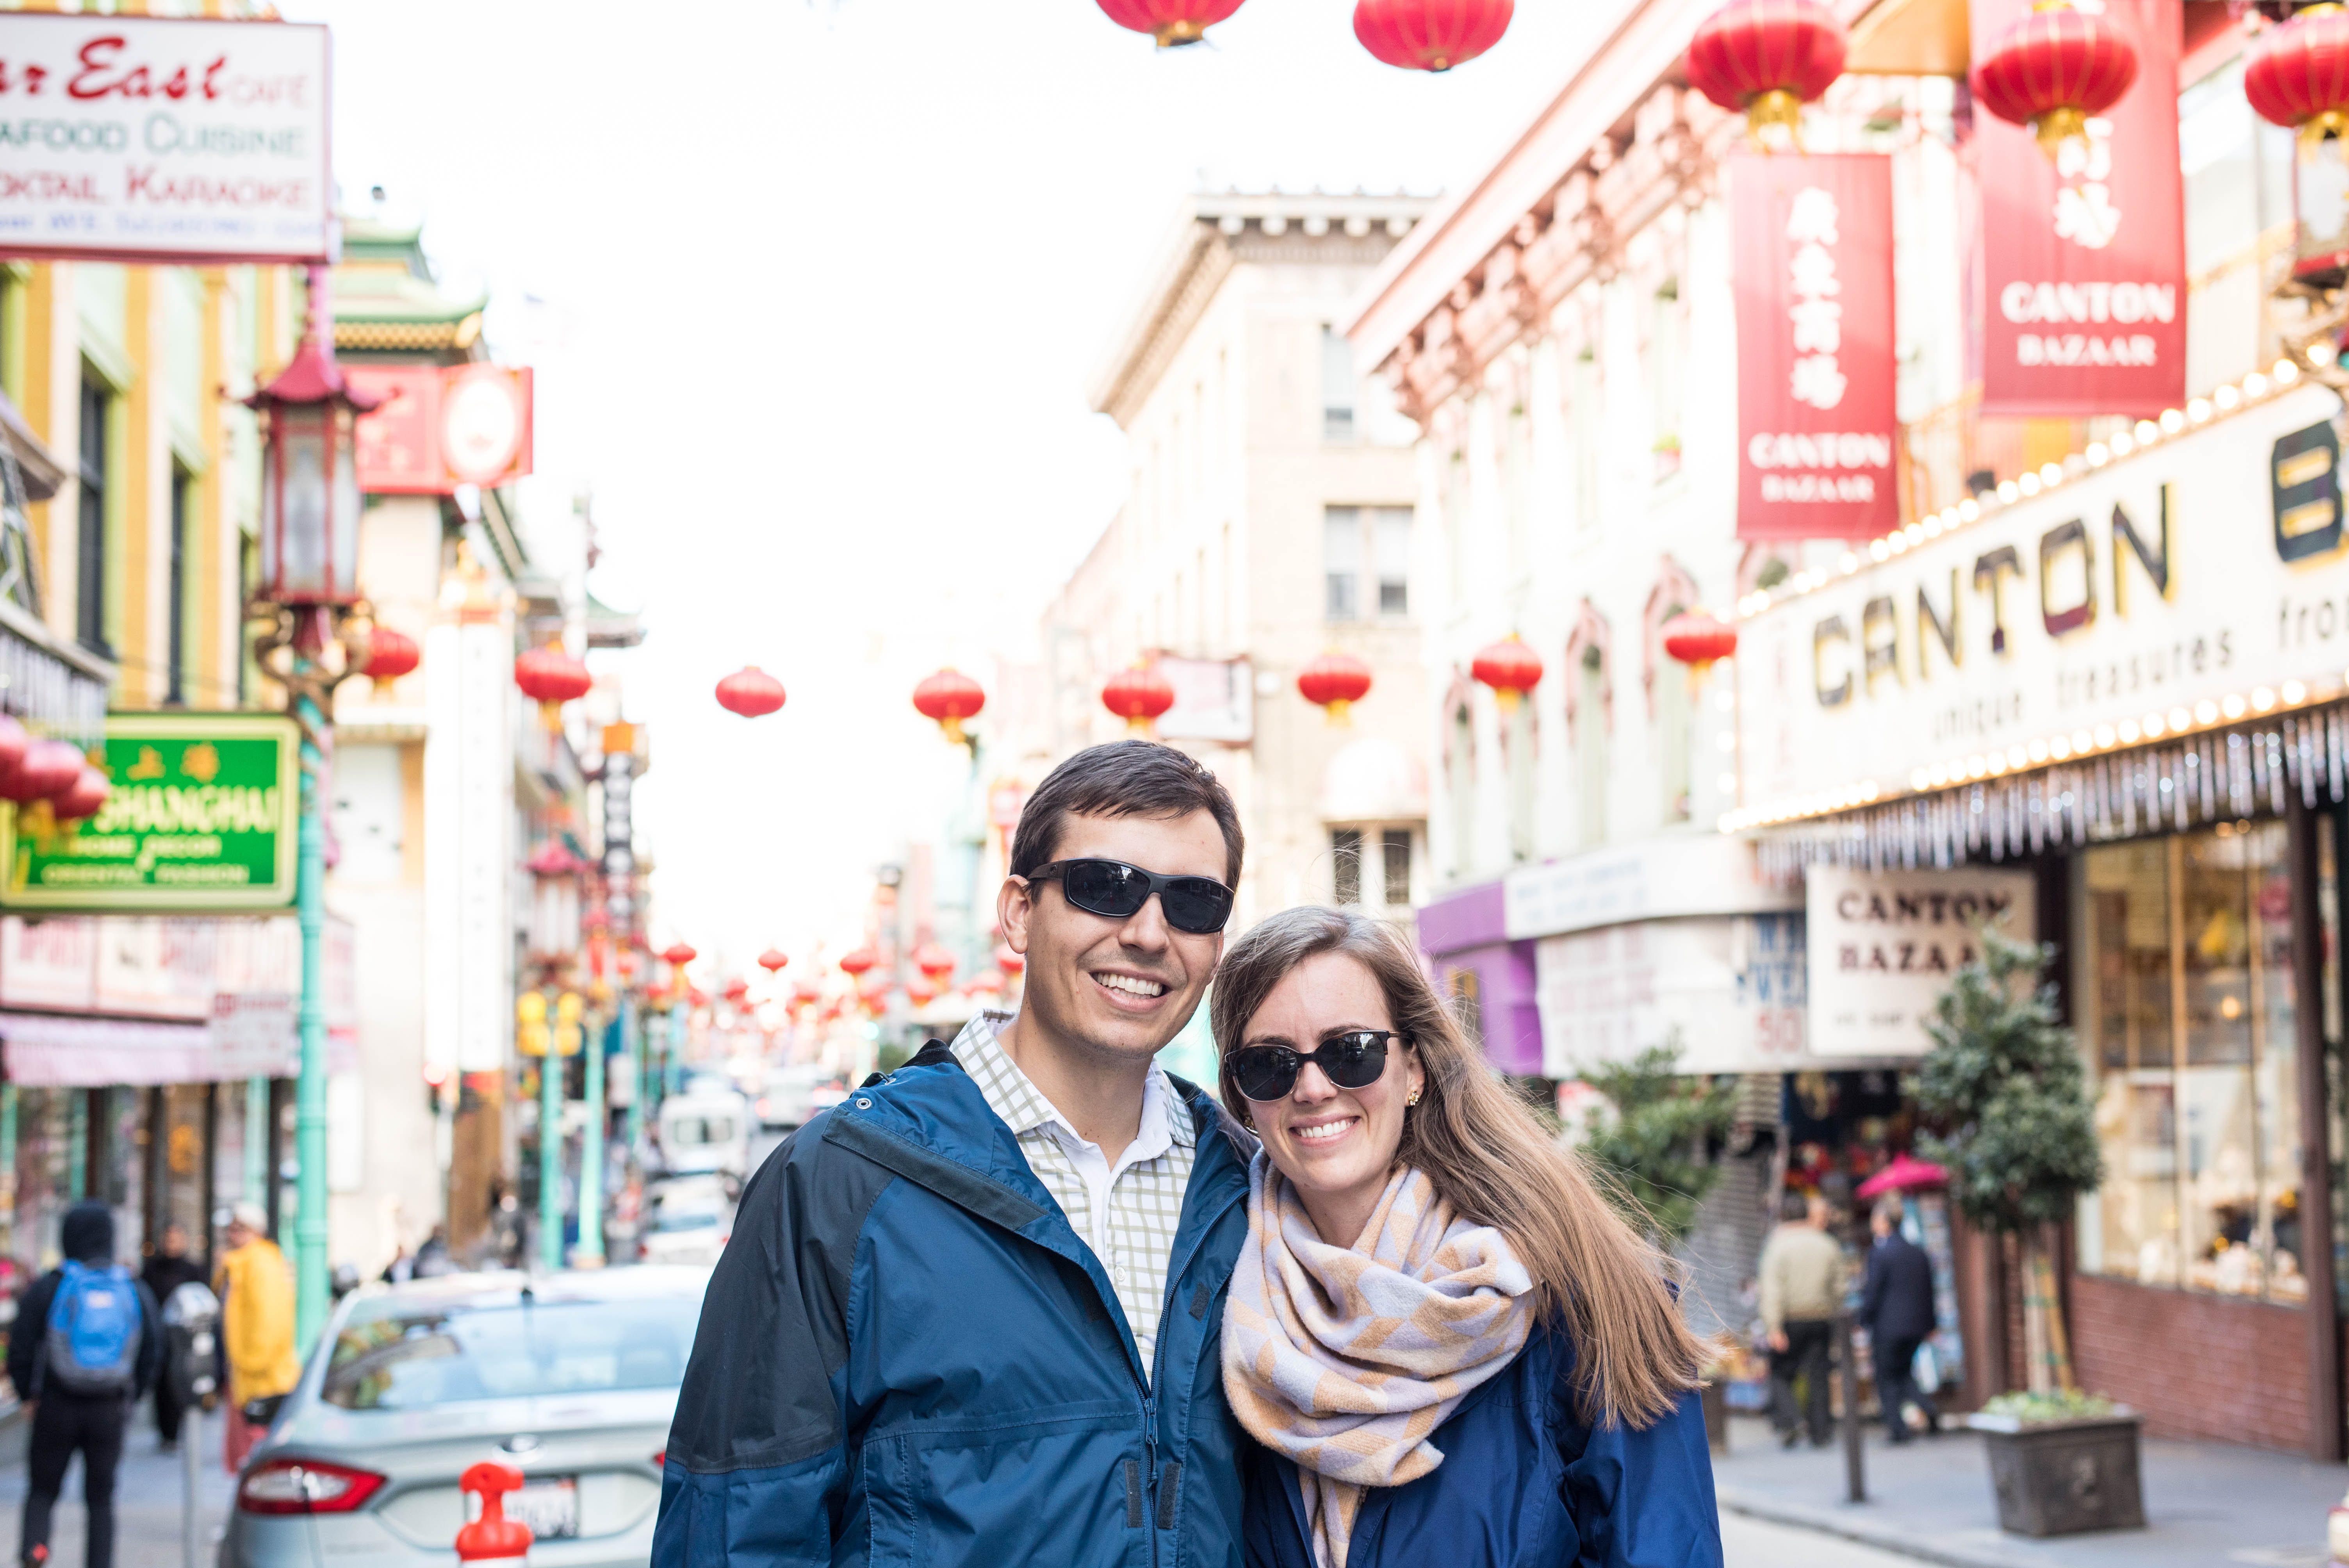 San Francisco Travel Guide - Chinatown